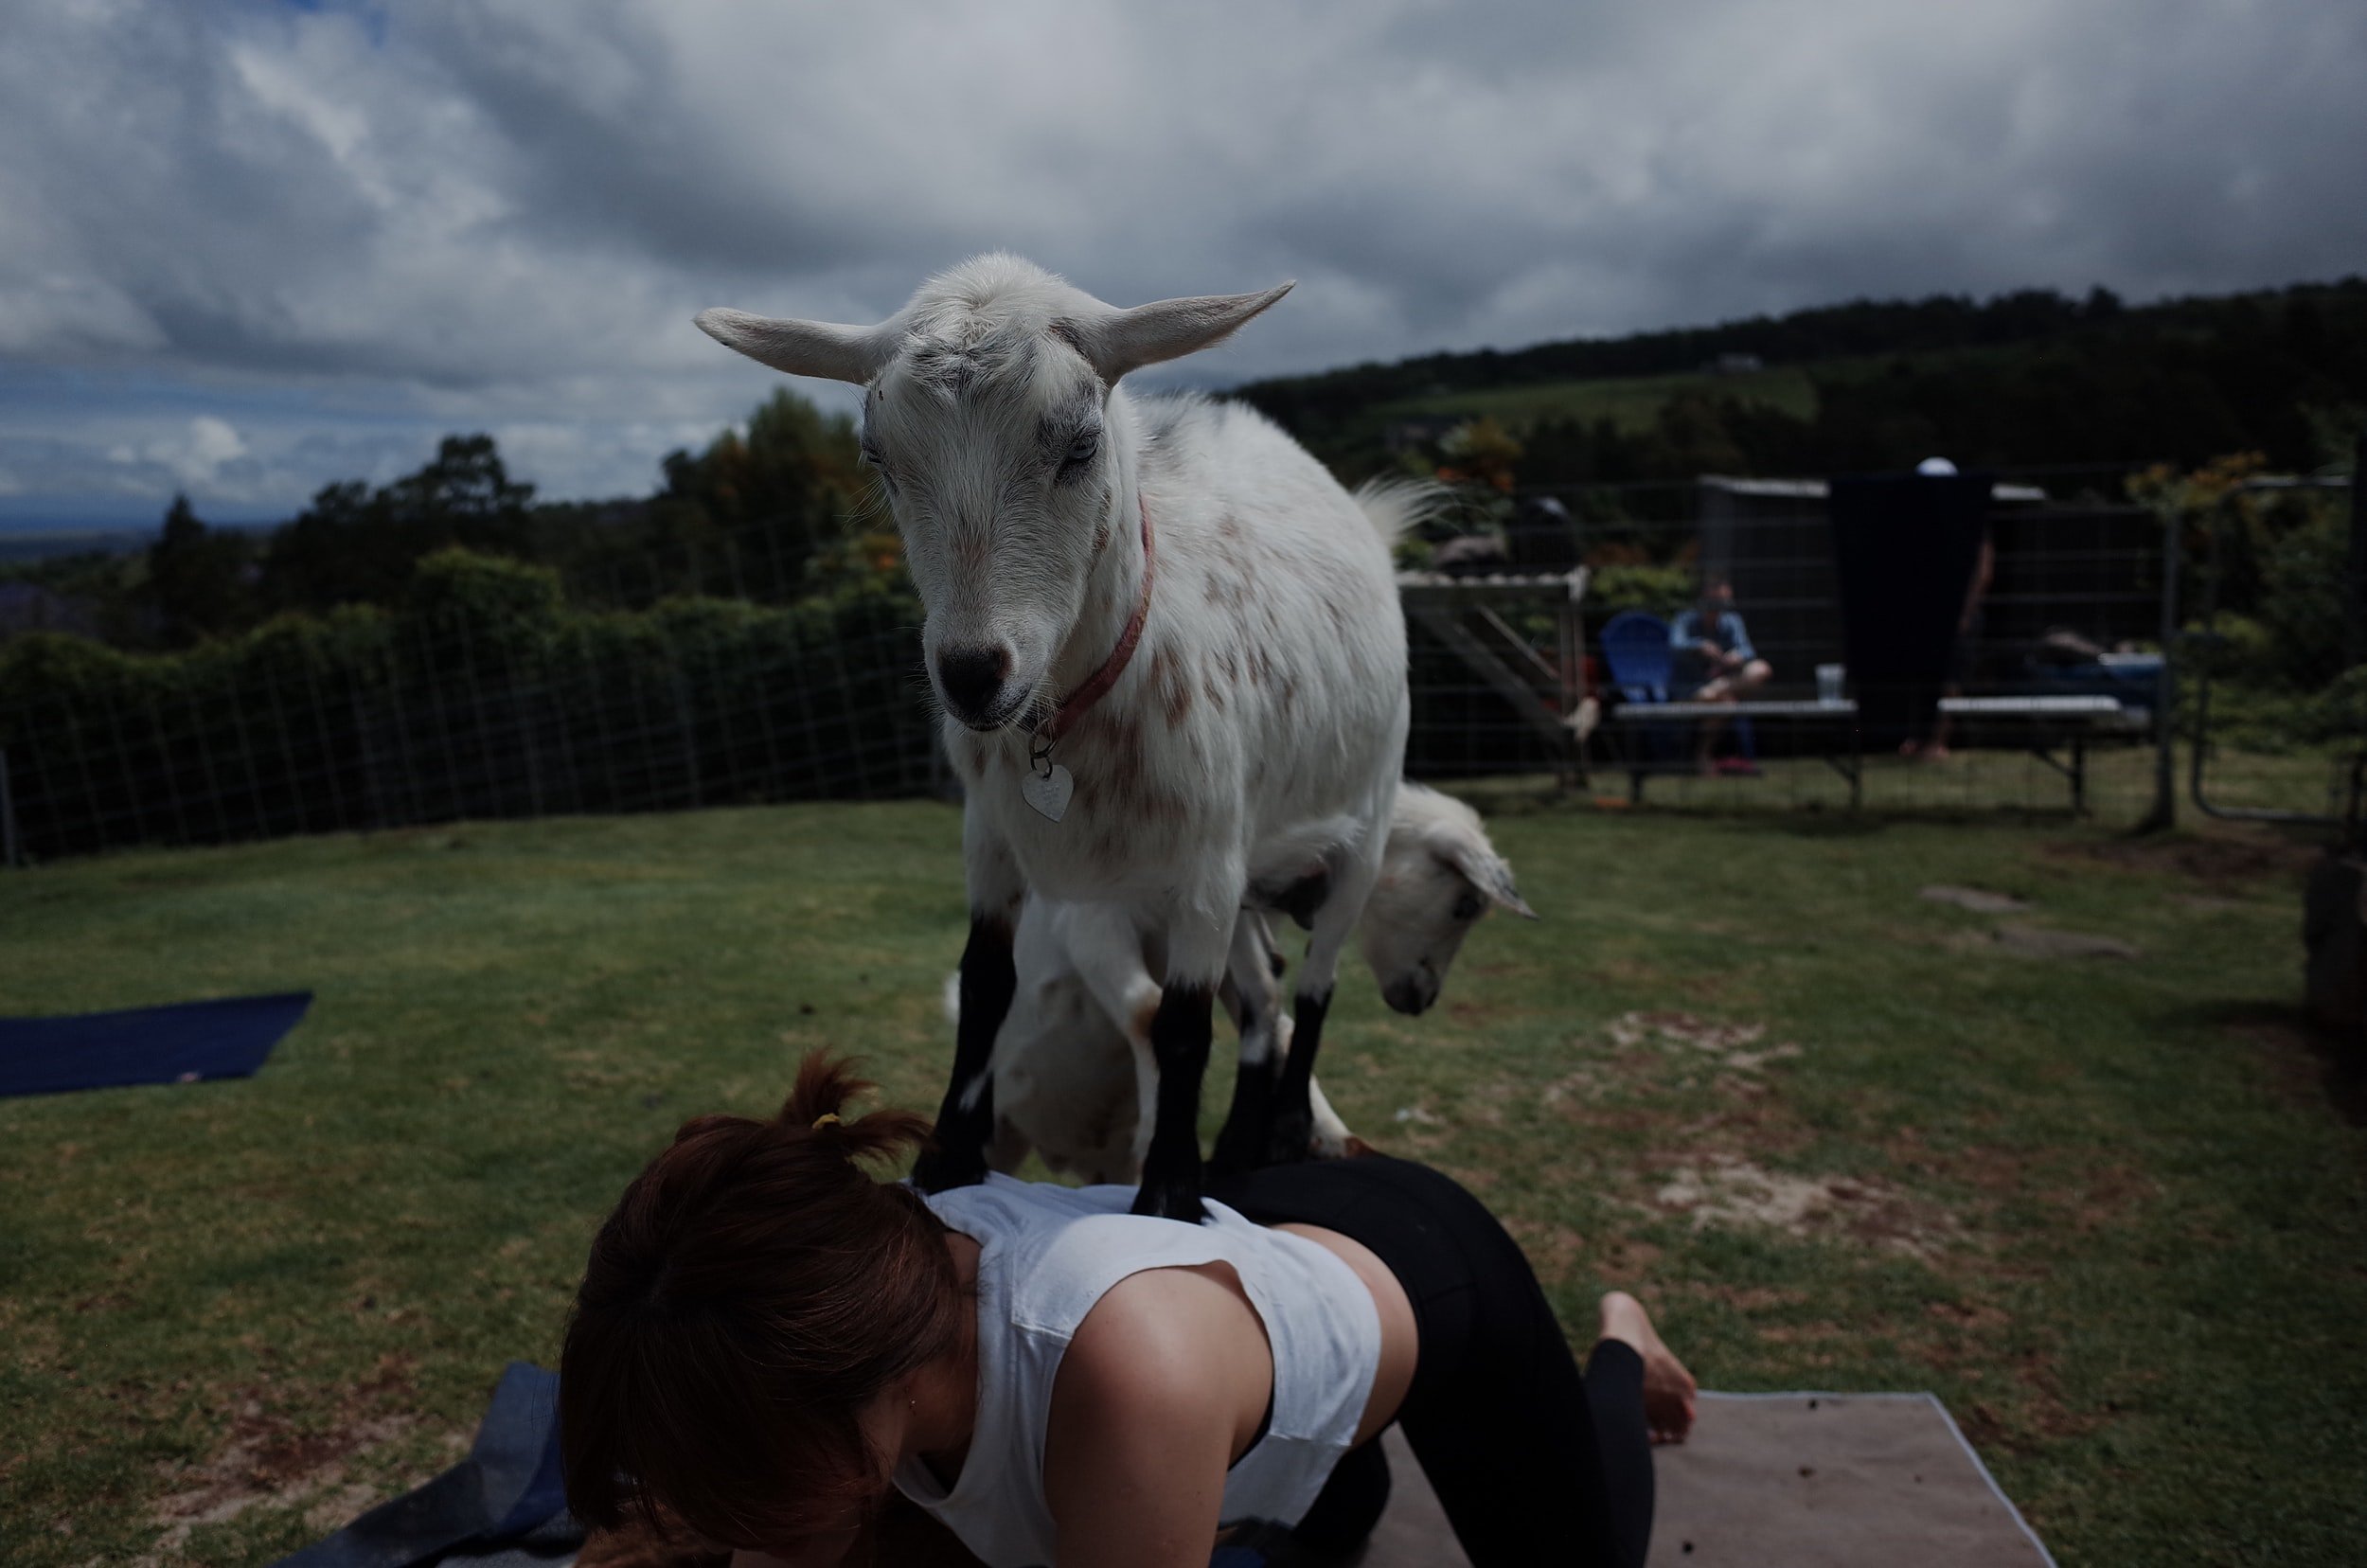 Looking For Sober Date Ideas? My Partner And I Took A Yoga Class With Goats